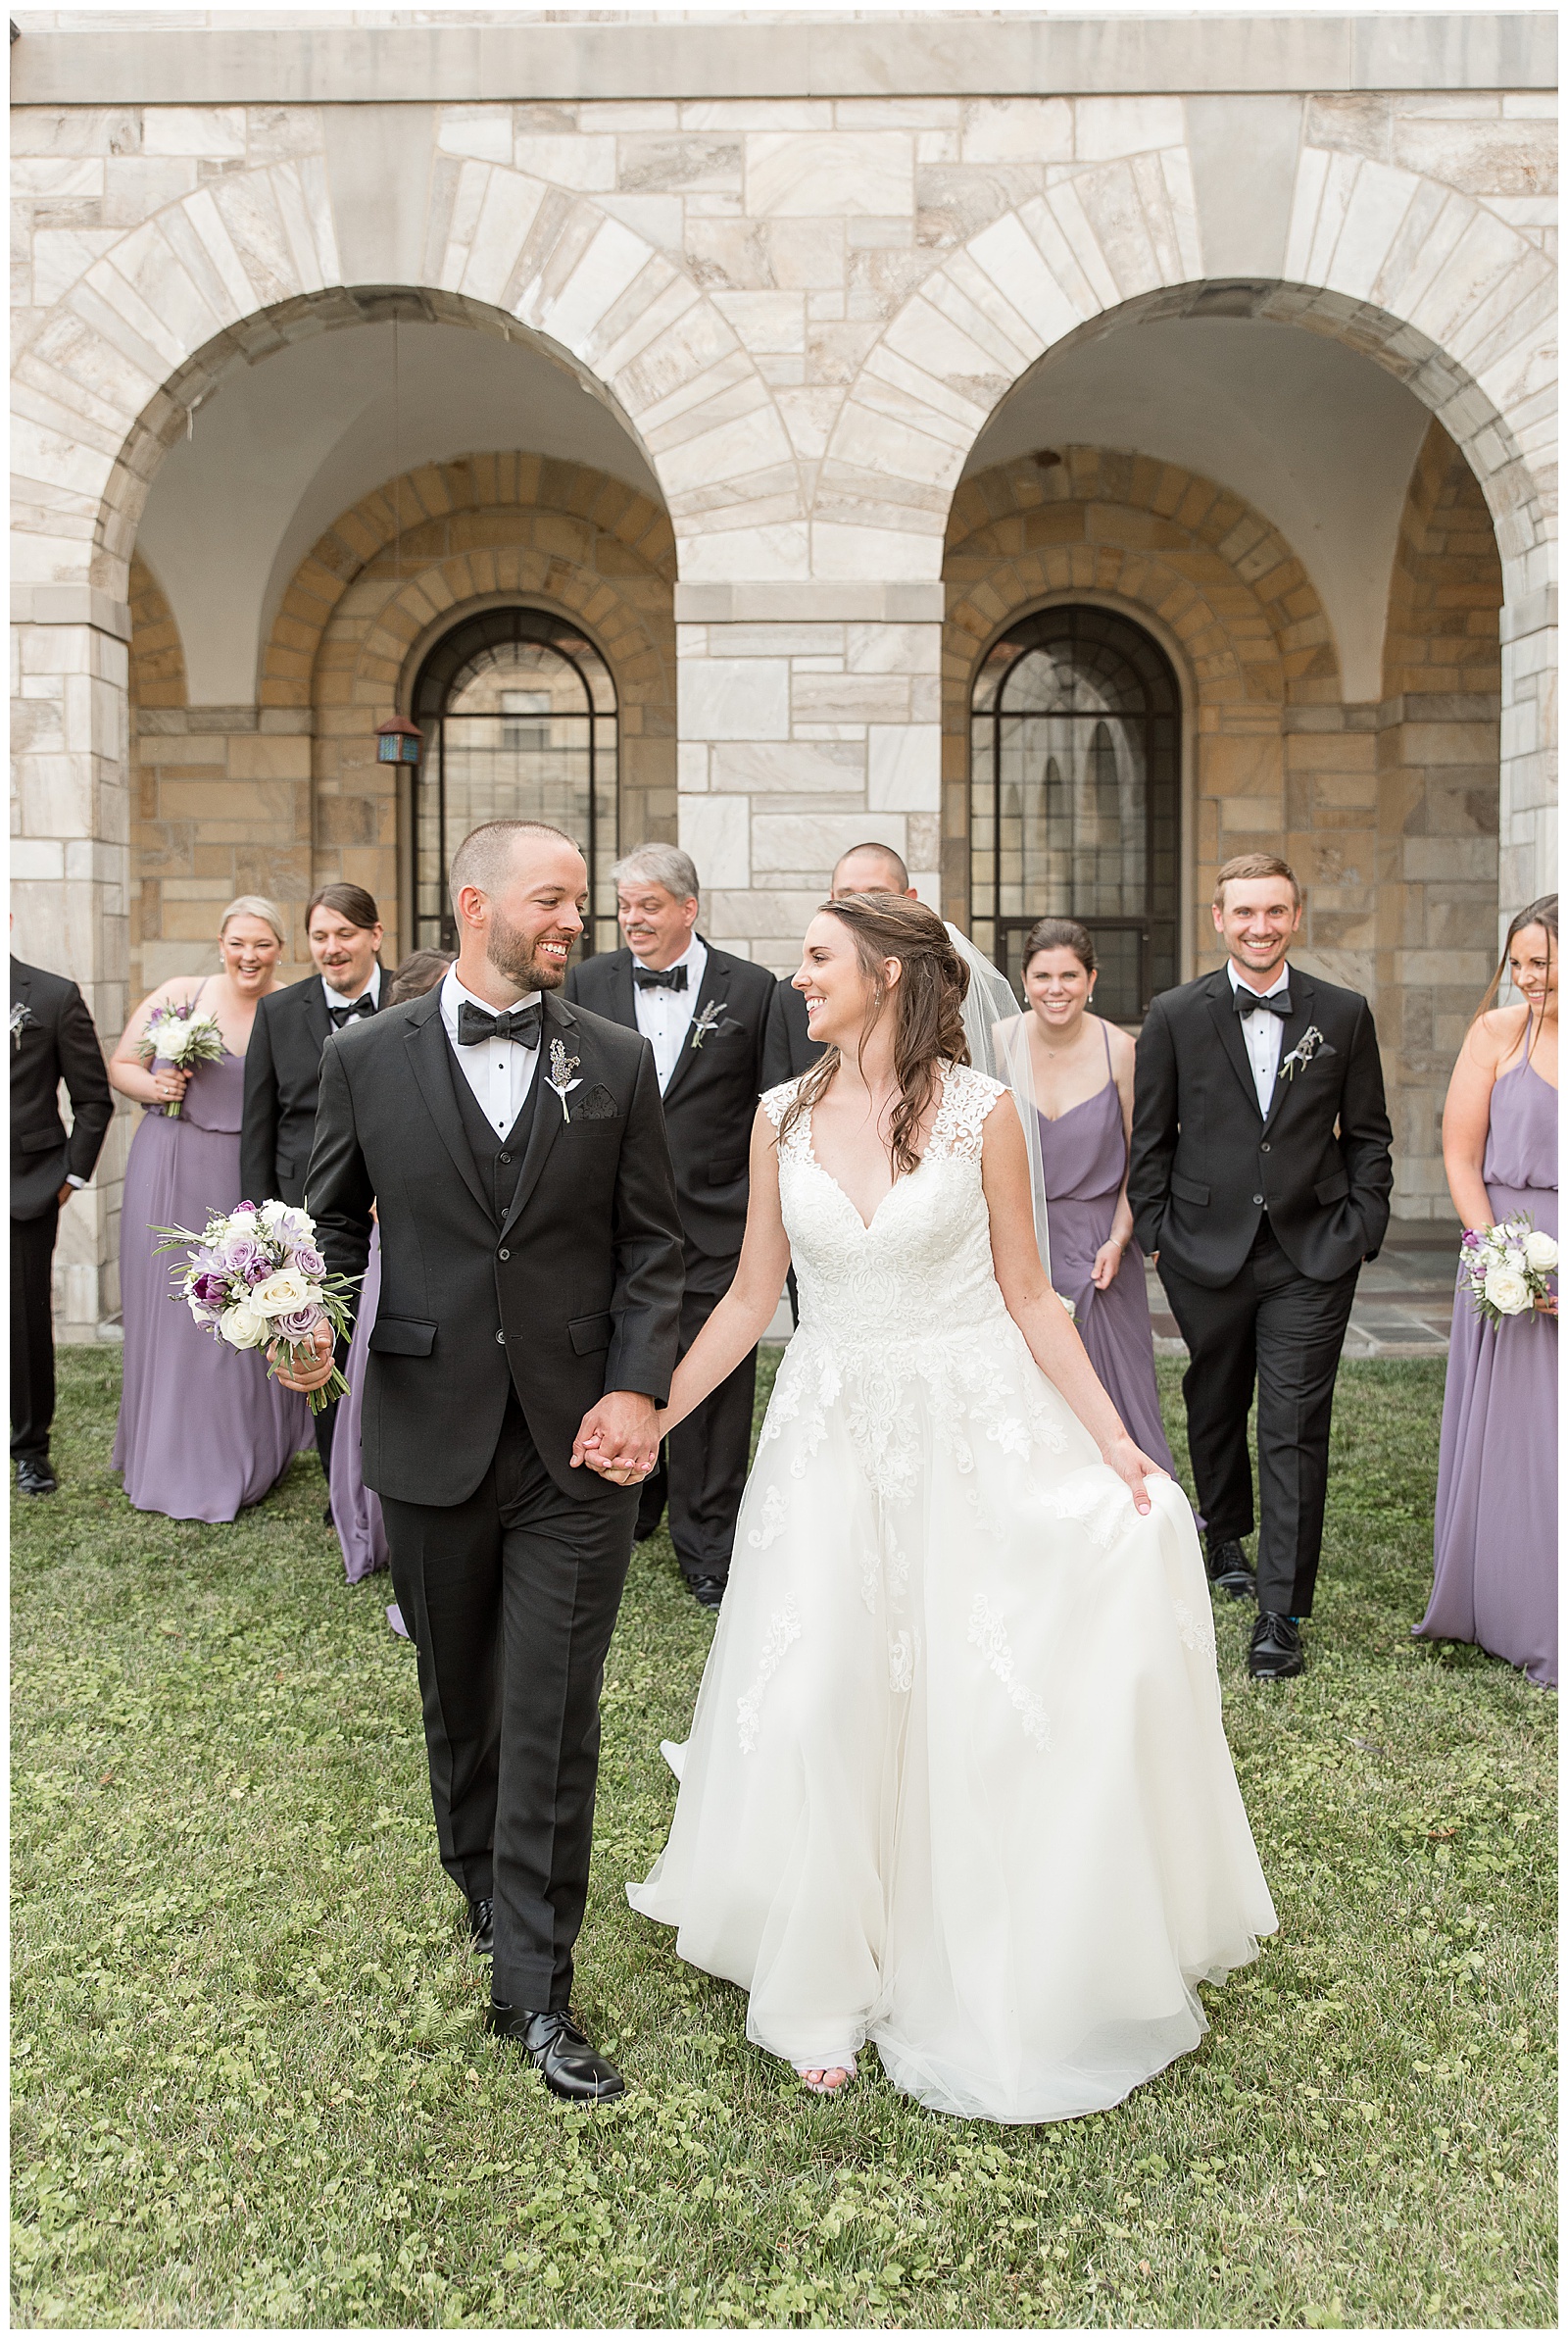 bride and groom walking hand-in-hand smiling at each other with bridal party walking behind